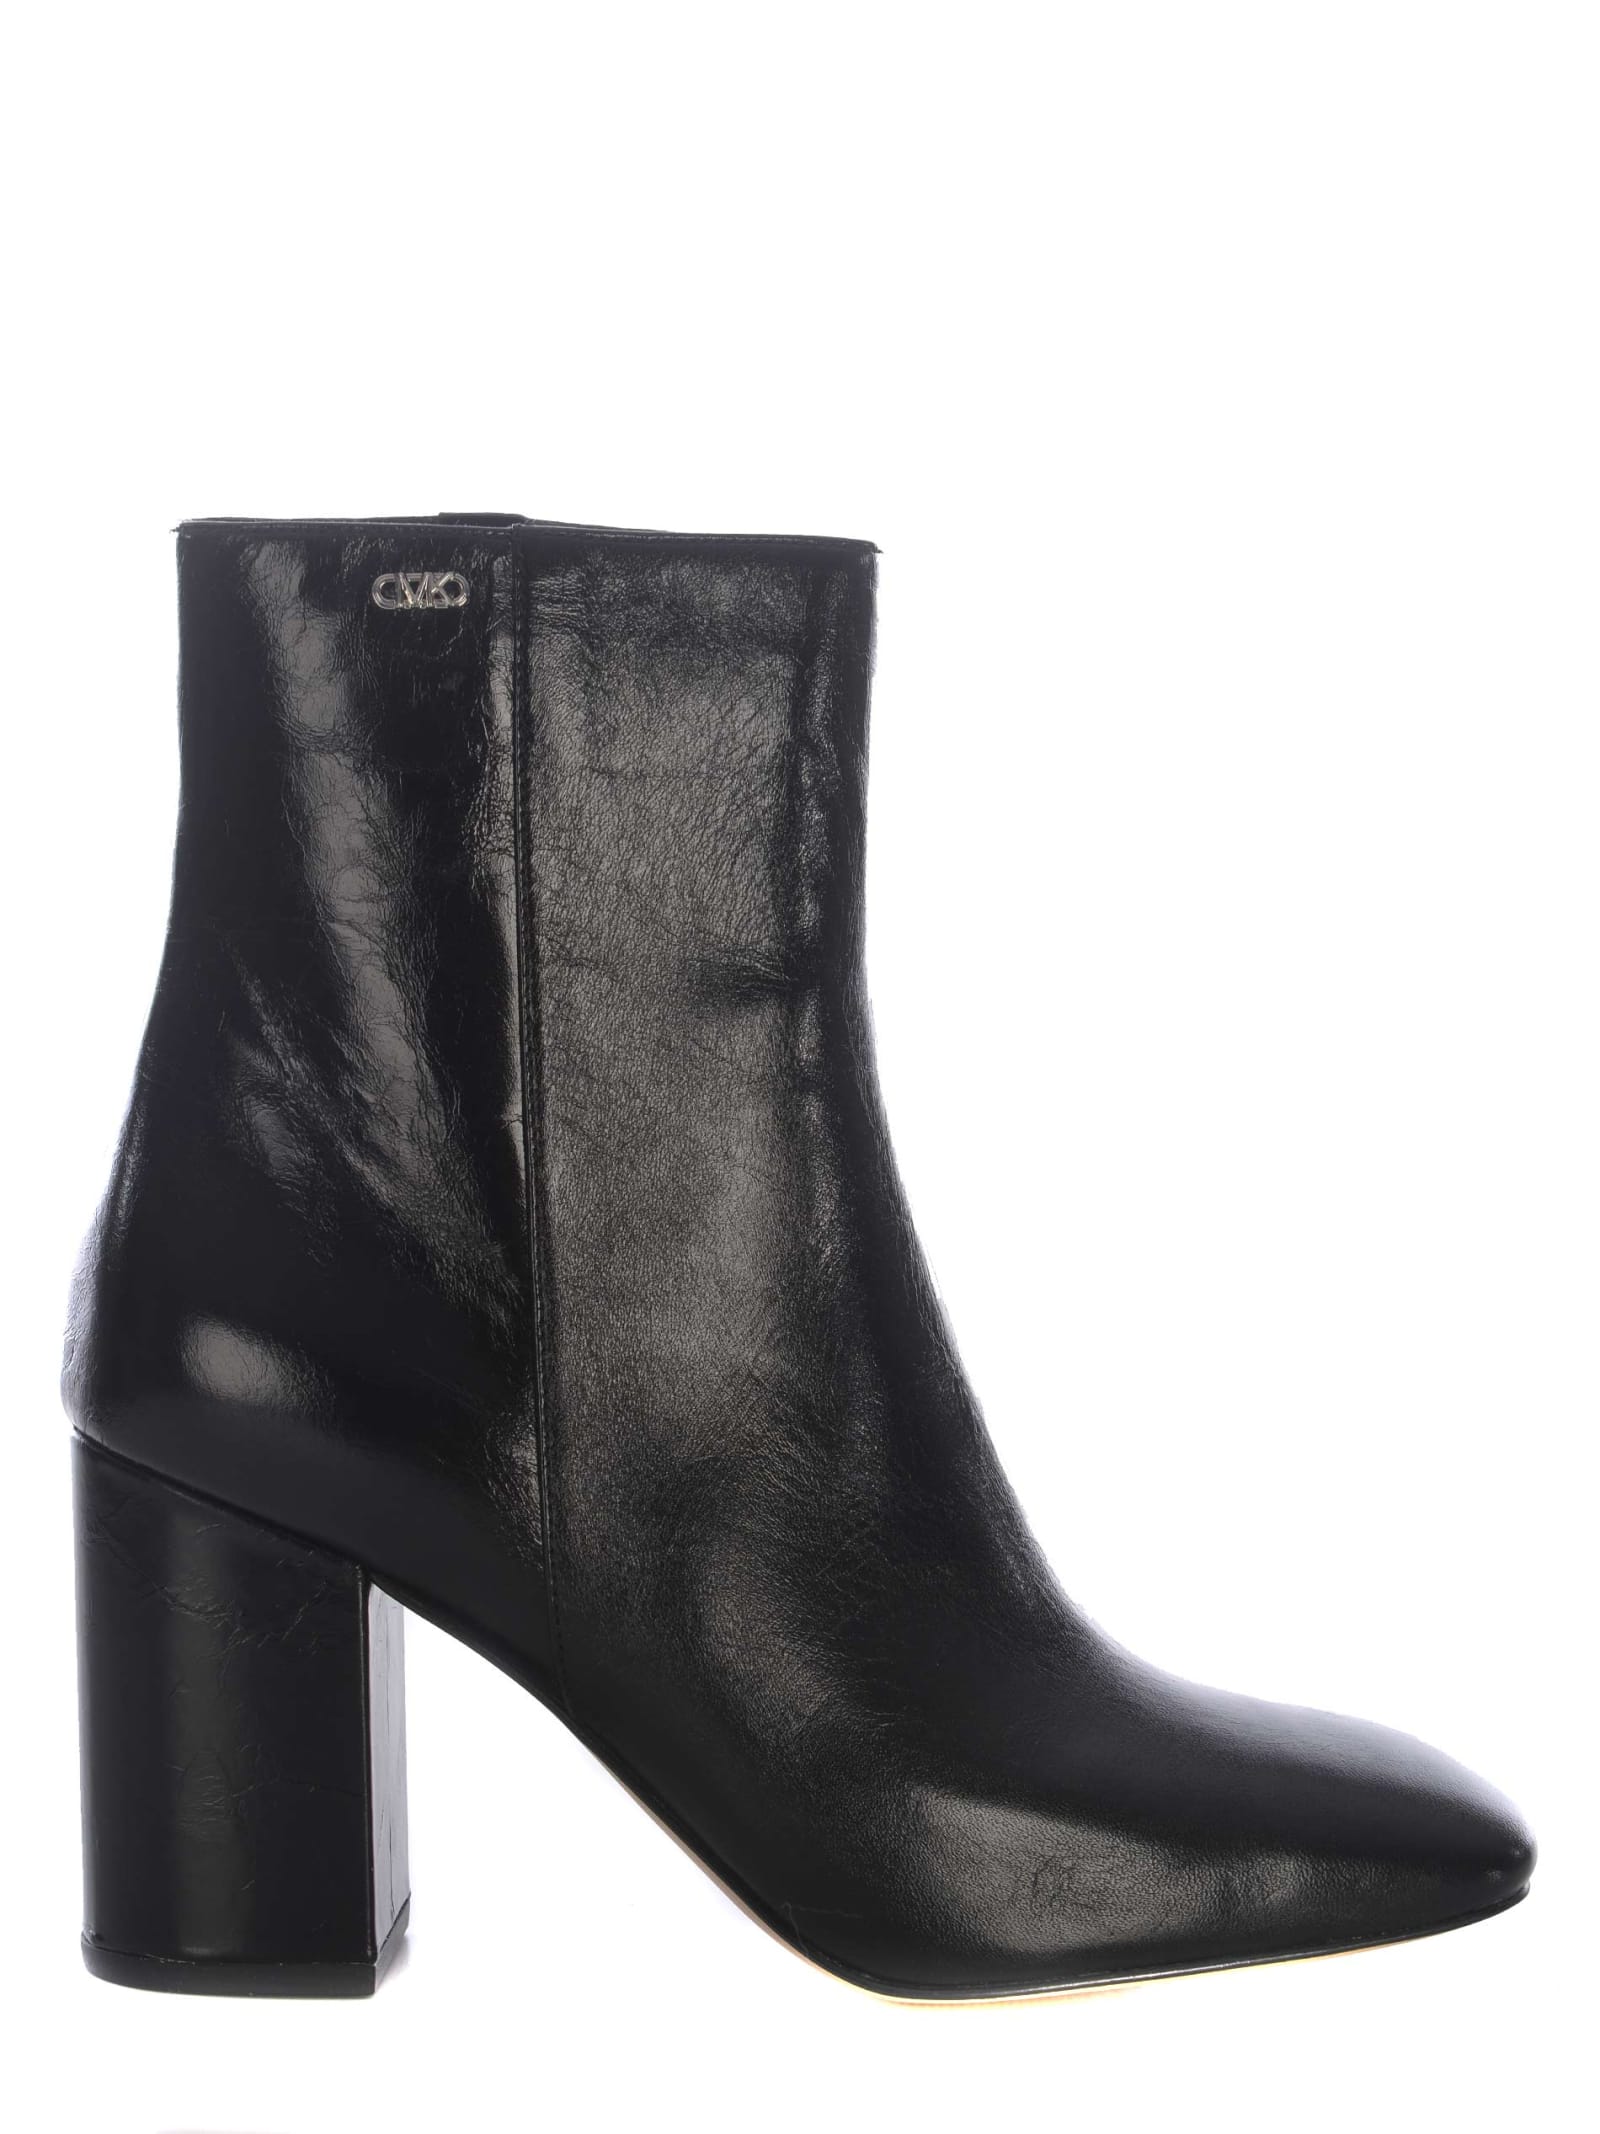 MICHAEL KORS ANKLE BOOTS MICHAEL KORS PERLA IN LEATHER